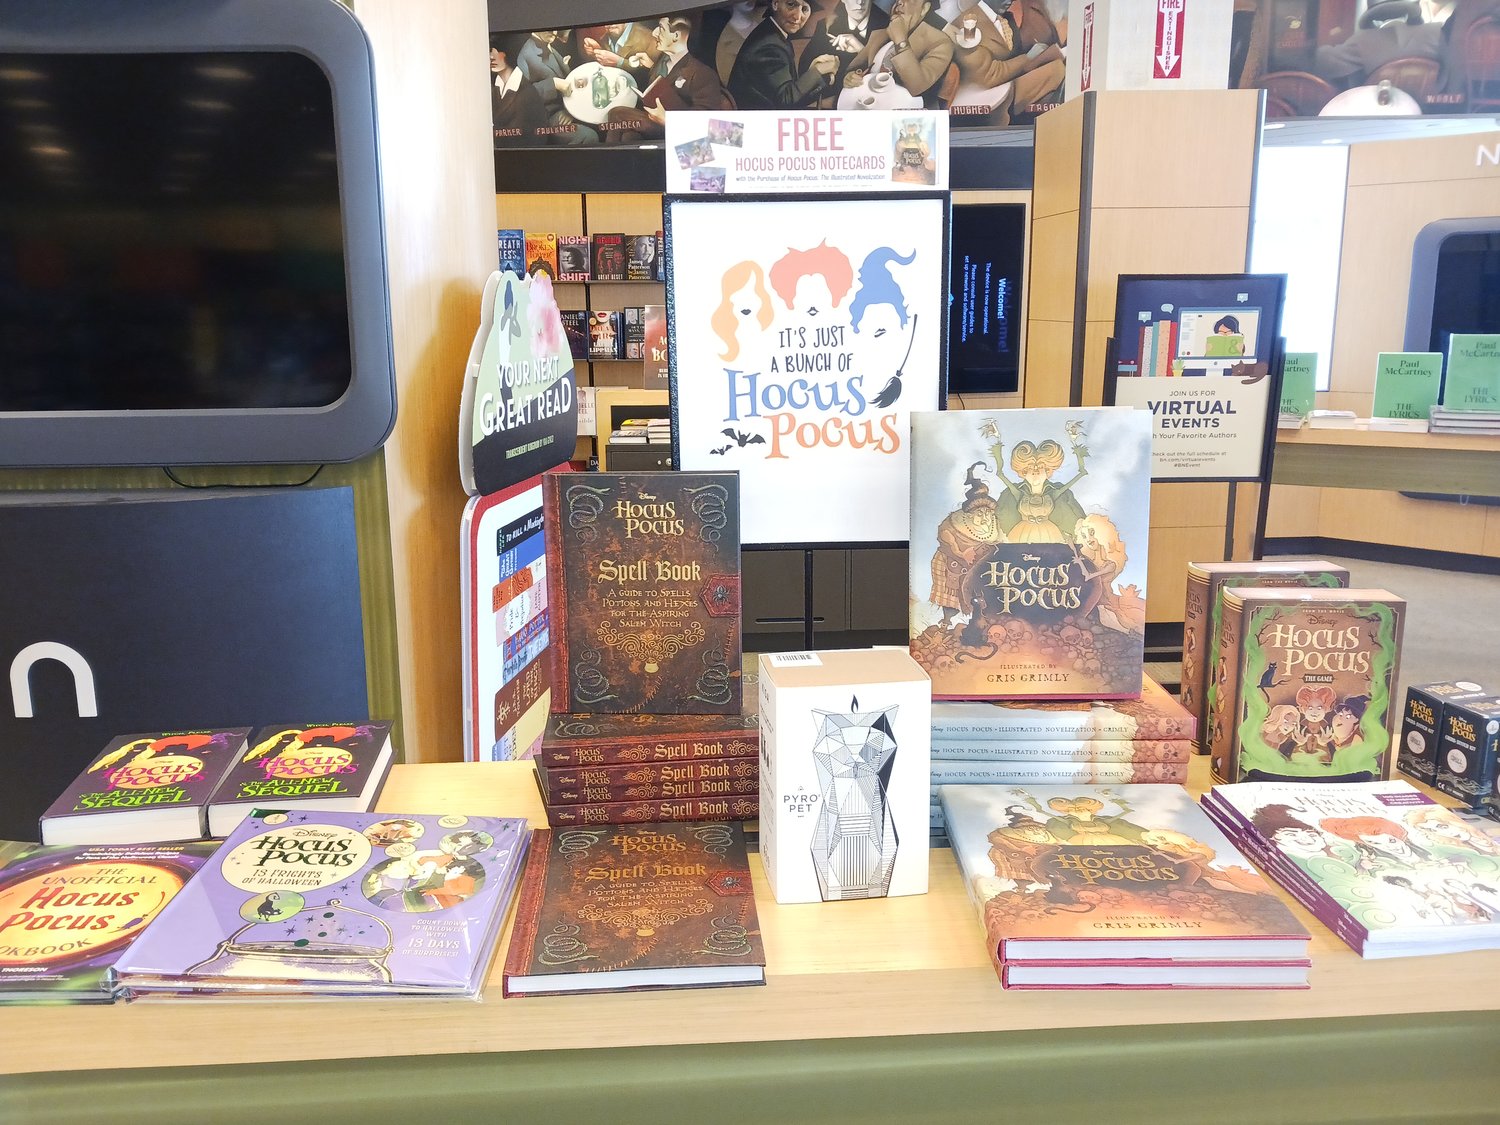 Barnes & Noble in New Hartford features in-store displays of titles in the horror genre, as well as Halloween-themed titles. They also have a display of fall-themed children’s books.